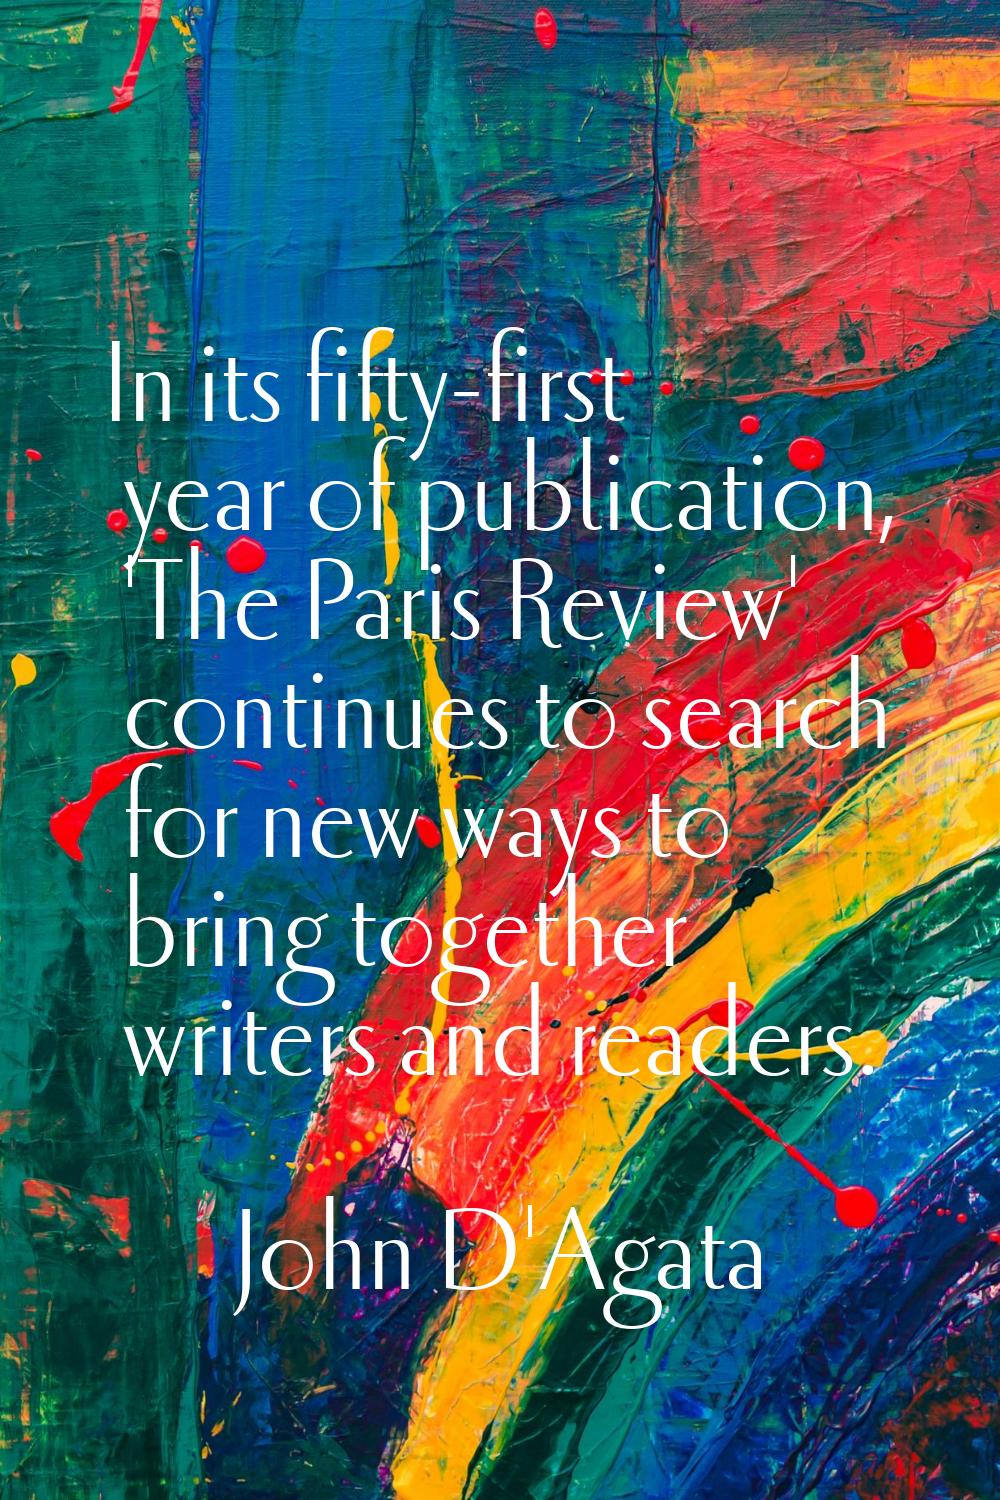 In its fifty-first year of publication, 'The Paris Review' continues to search for new ways to brin